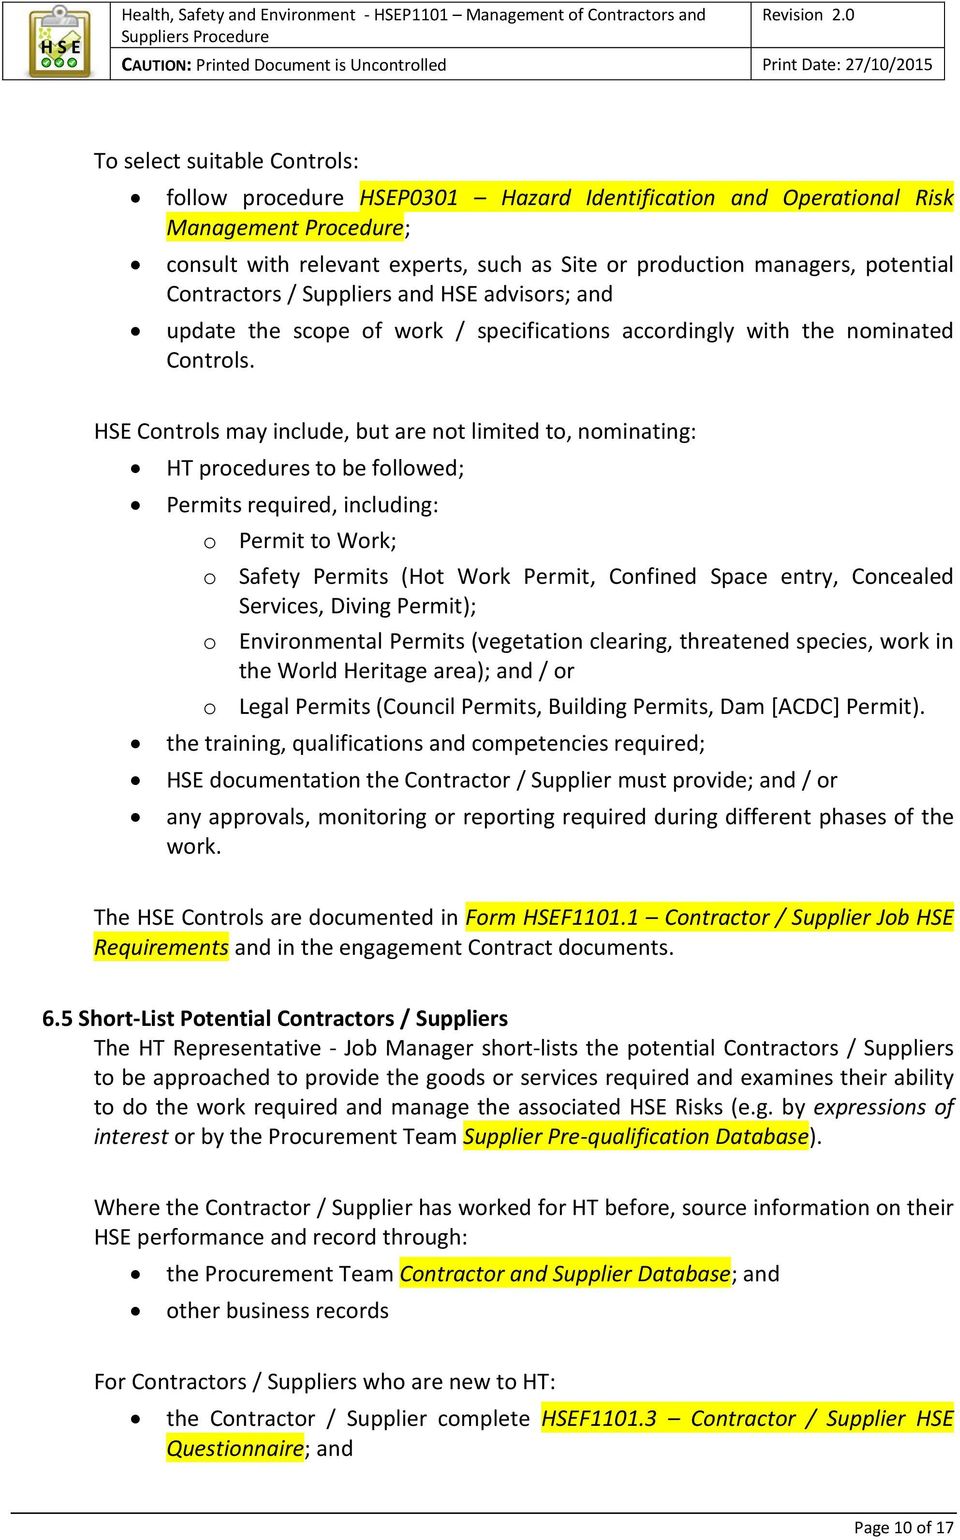 HSE Controls may include, but are not limited to, nominating: HT procedures to be followed; Permits required, including: o Permit to Work; o Safety Permits (Hot Work Permit, Confined Space entry,